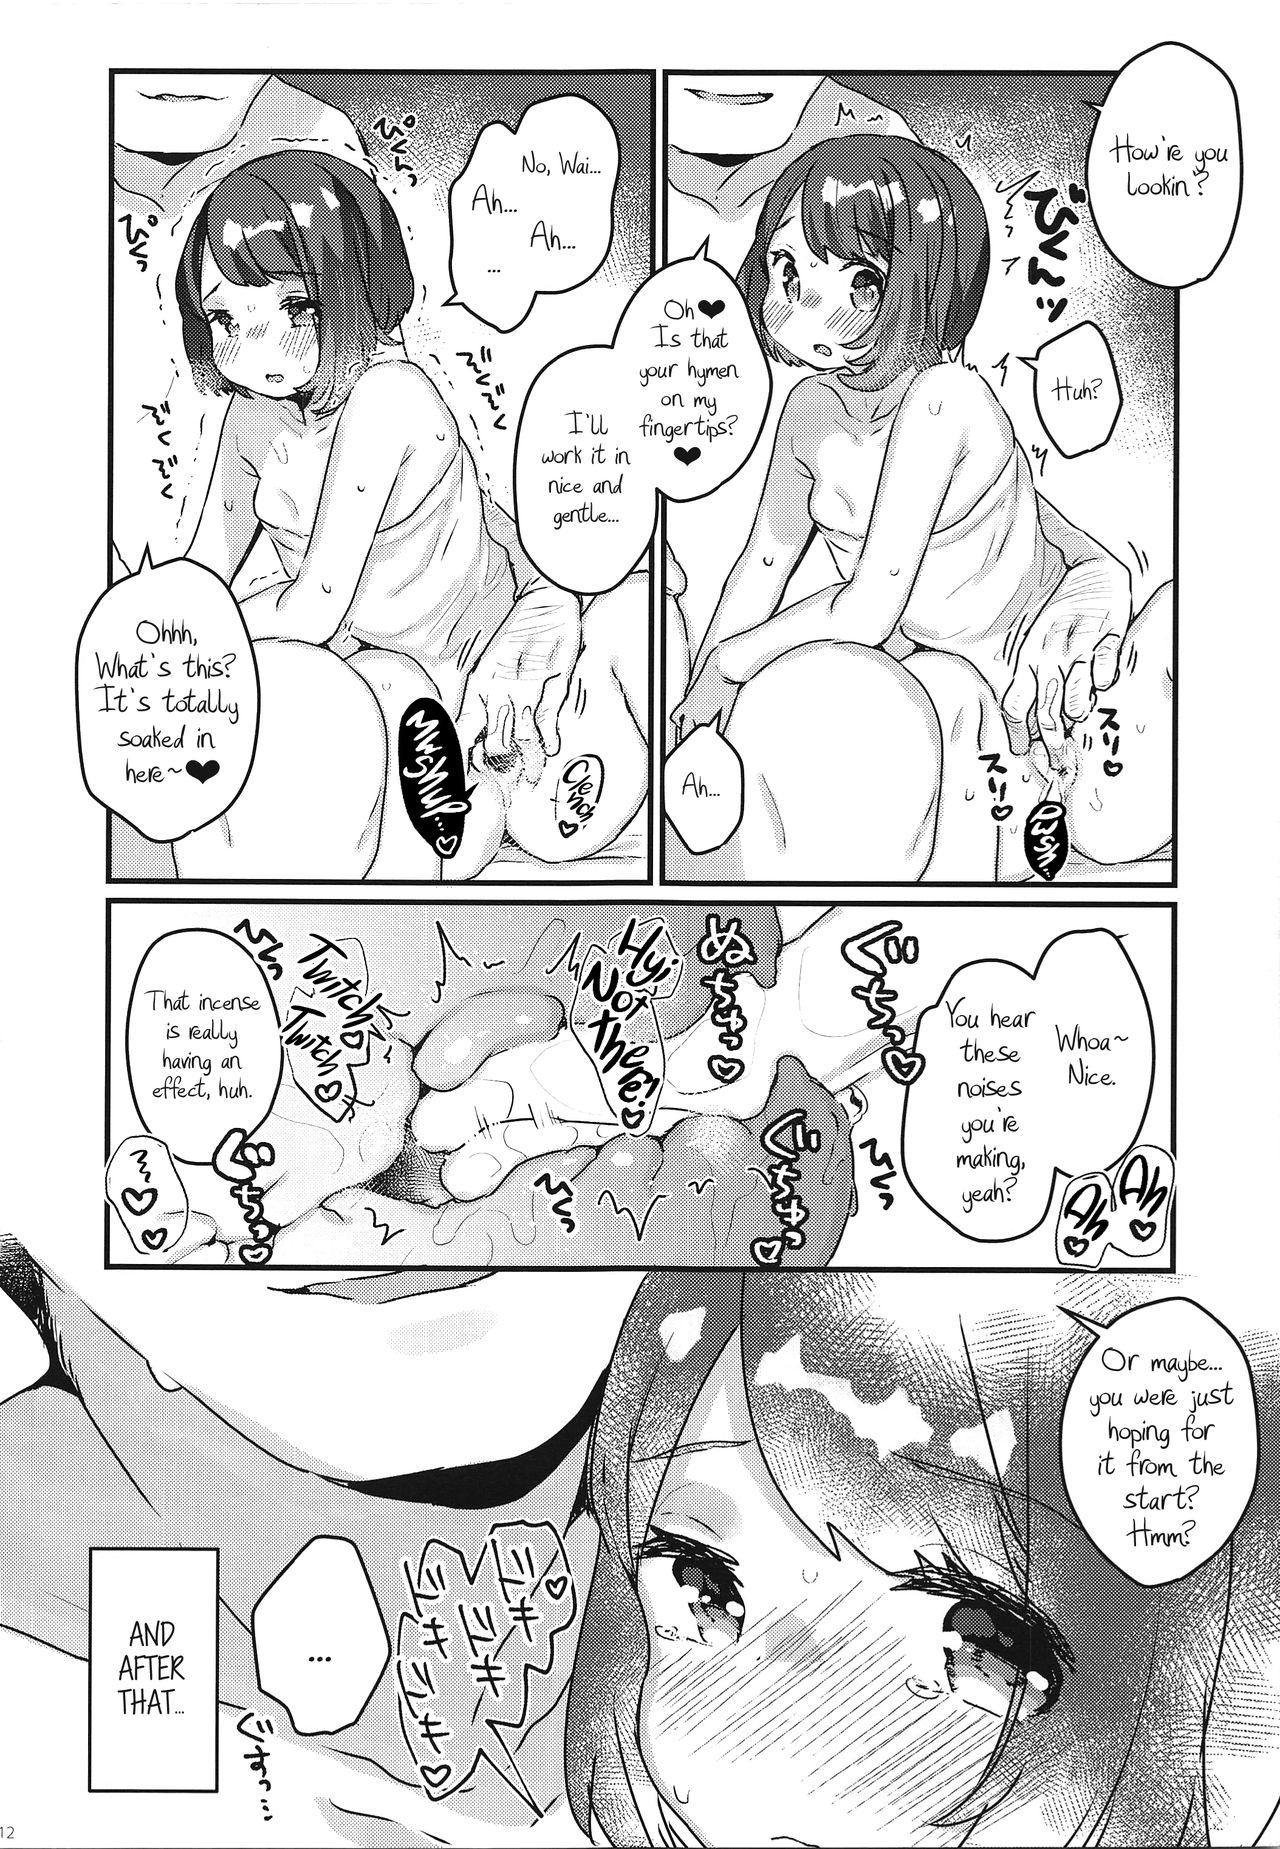 Toying "Datte Fuku, Taka Iindamon" | "I Mean, Clothes Are Just so Expensive~" - Pokemon Gay Boysporn - Page 12